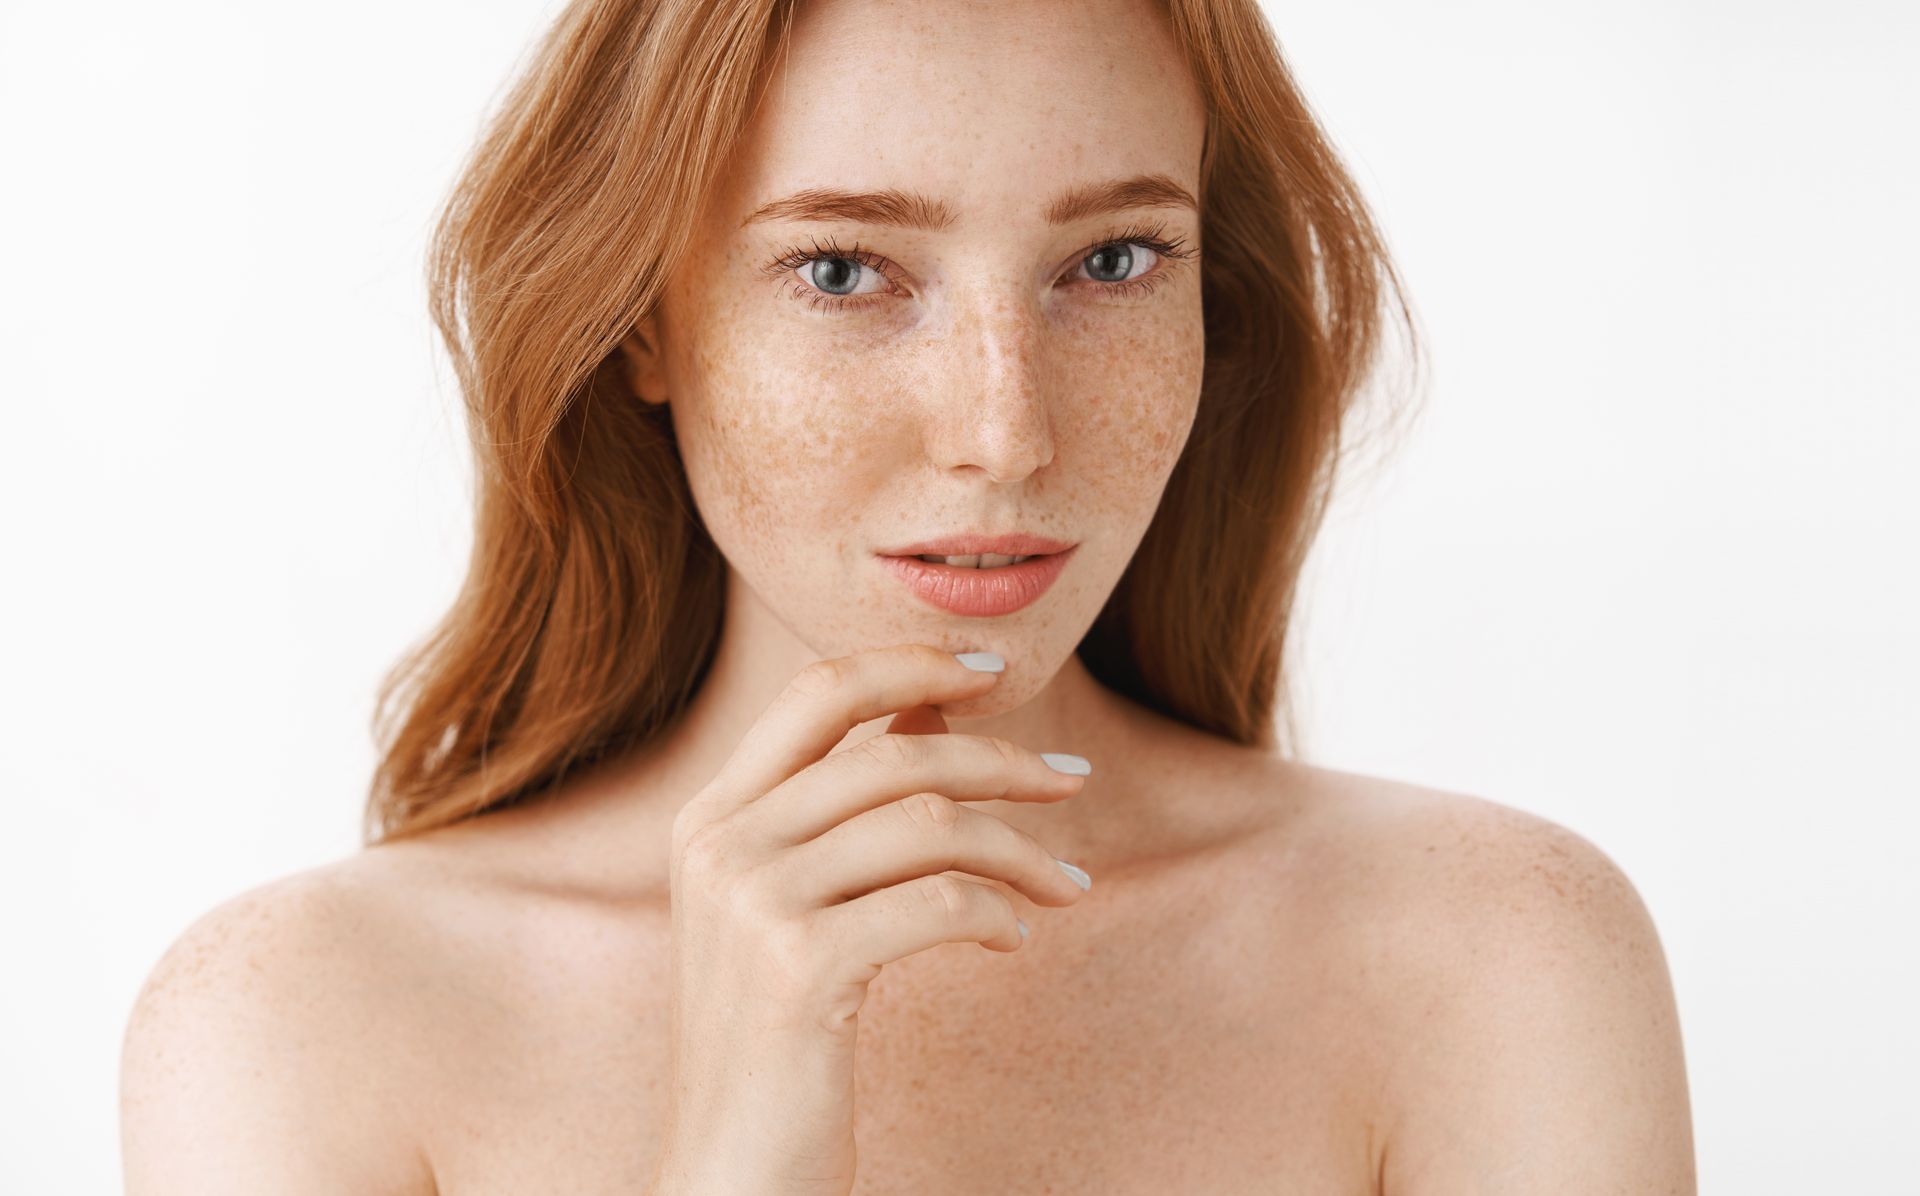 A woman with red hair and freckles is touching her face.